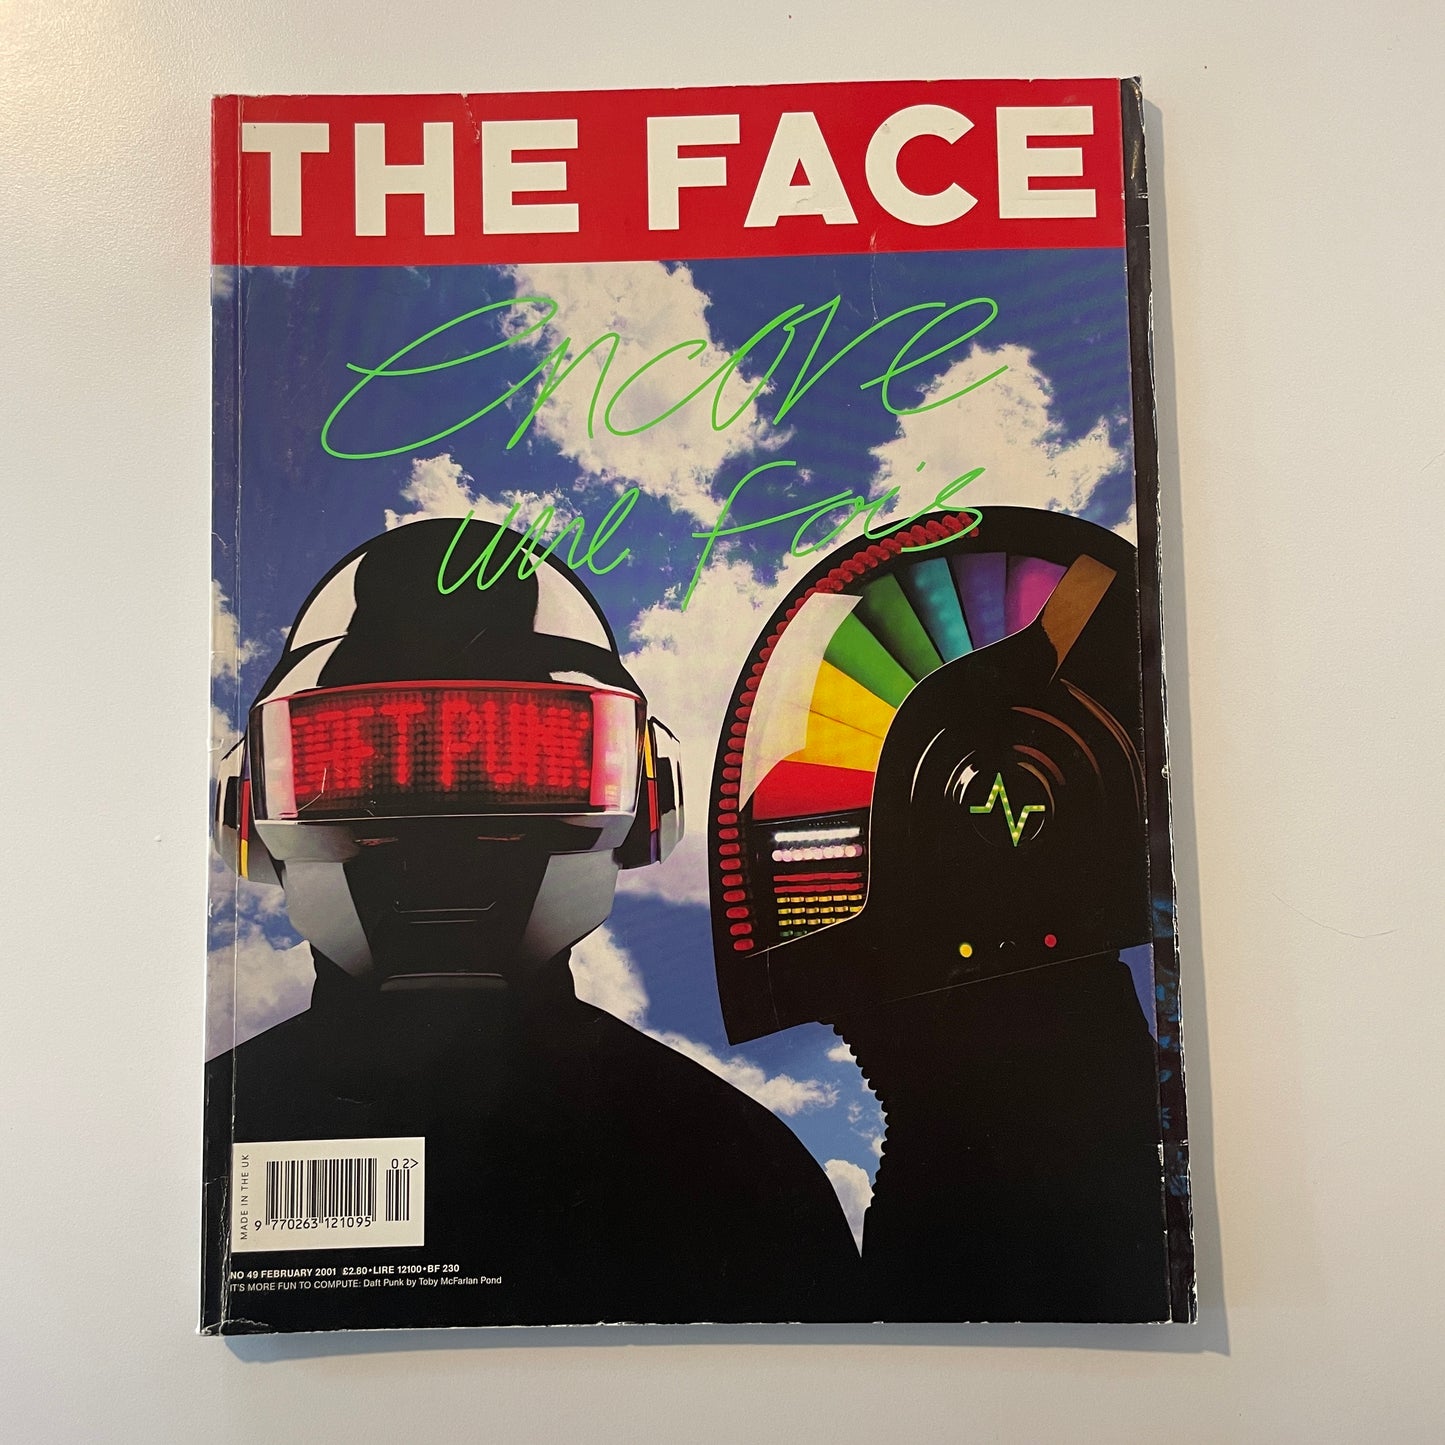 The Face No.49 - February 2001 - Daft Punk